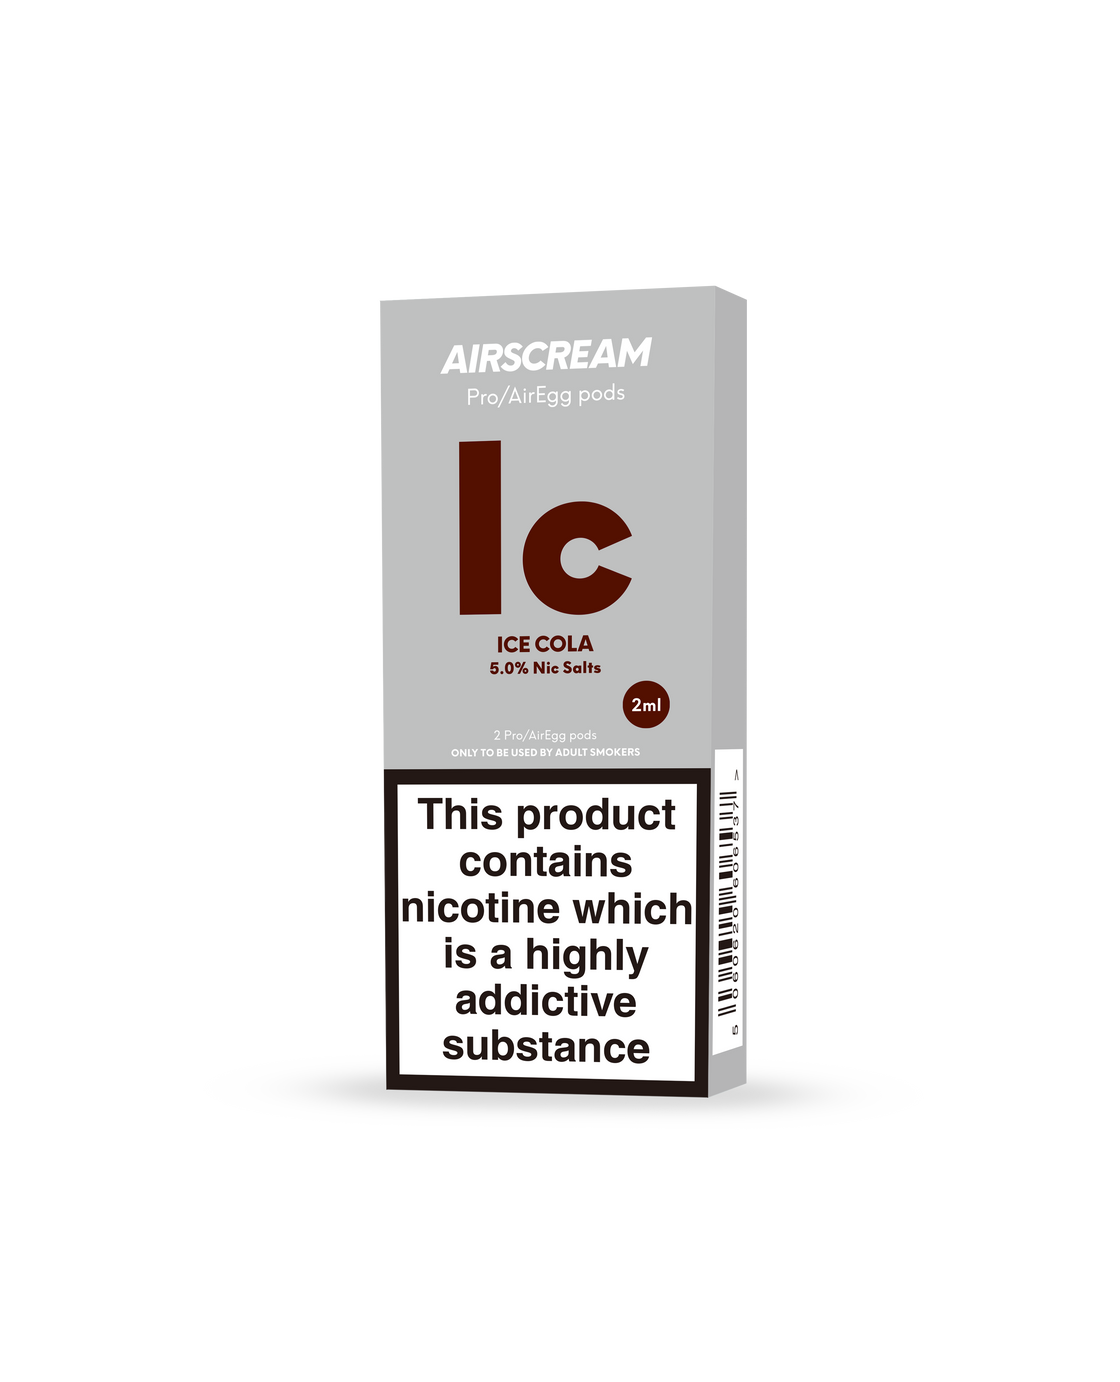 Ice Cola - AIRSCREAM AirsPops Pro 2ml Pods by VapeTrend NZ